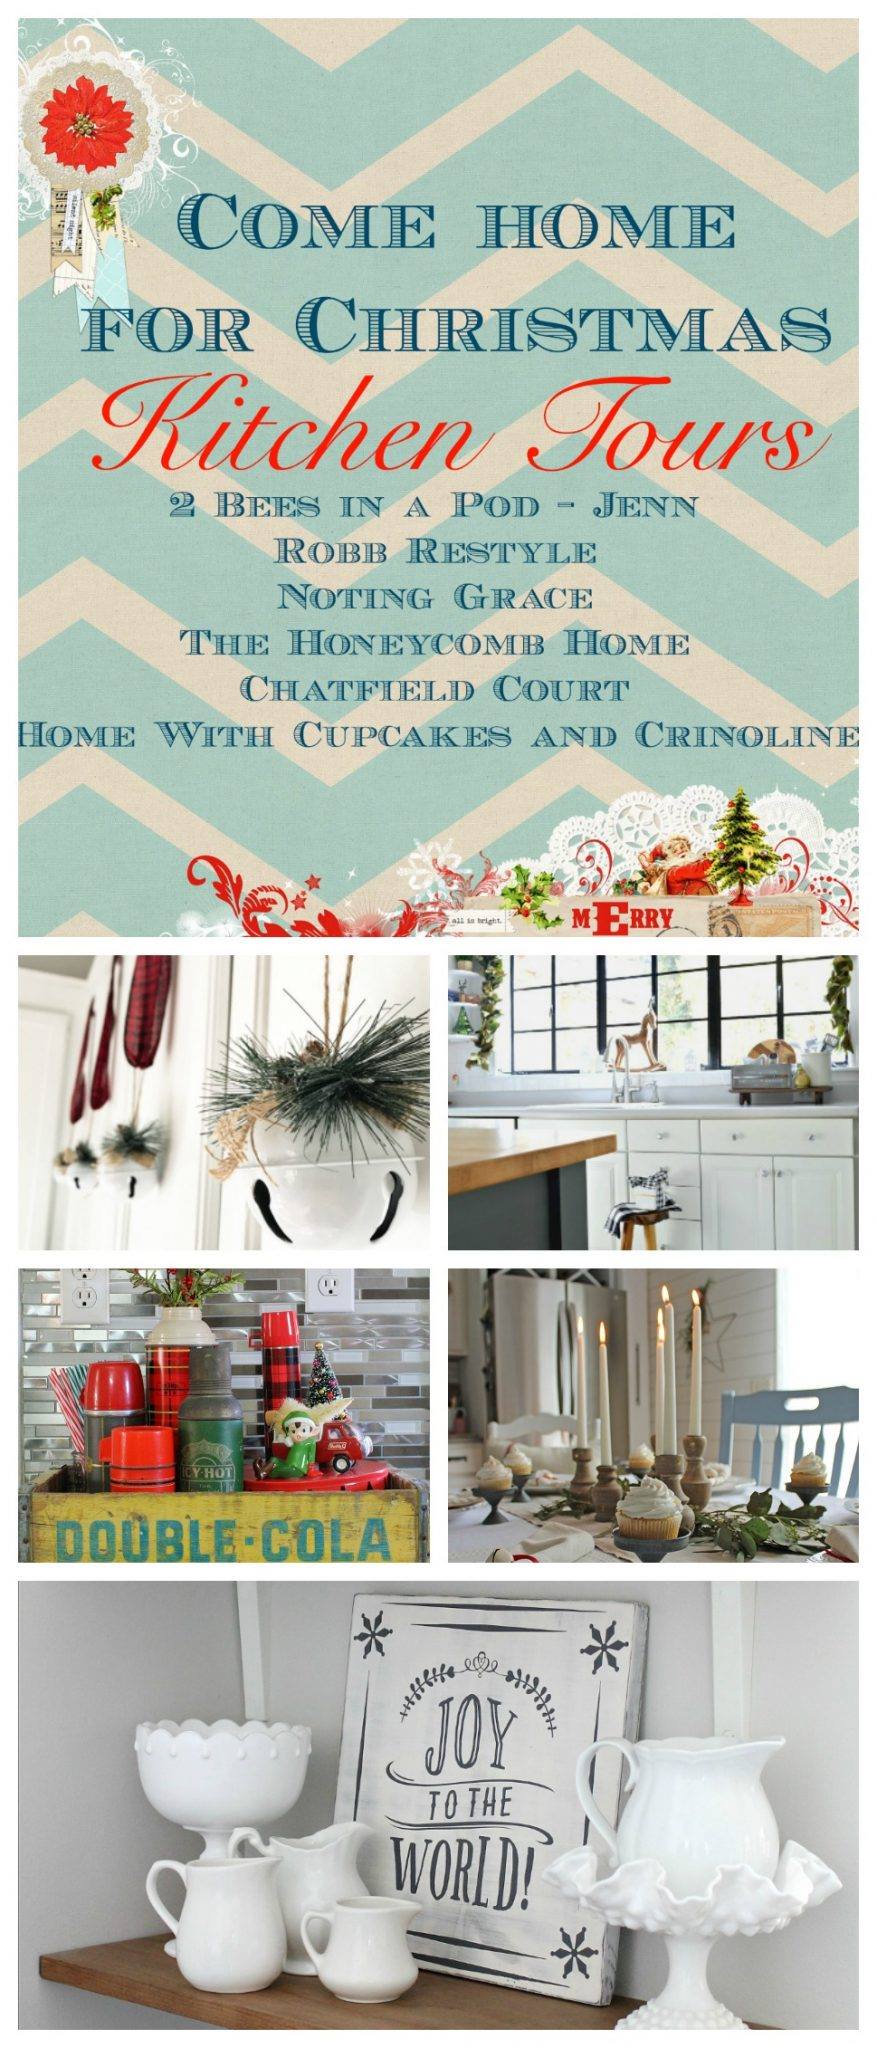 Come Home for Christmas Kitchen Tours